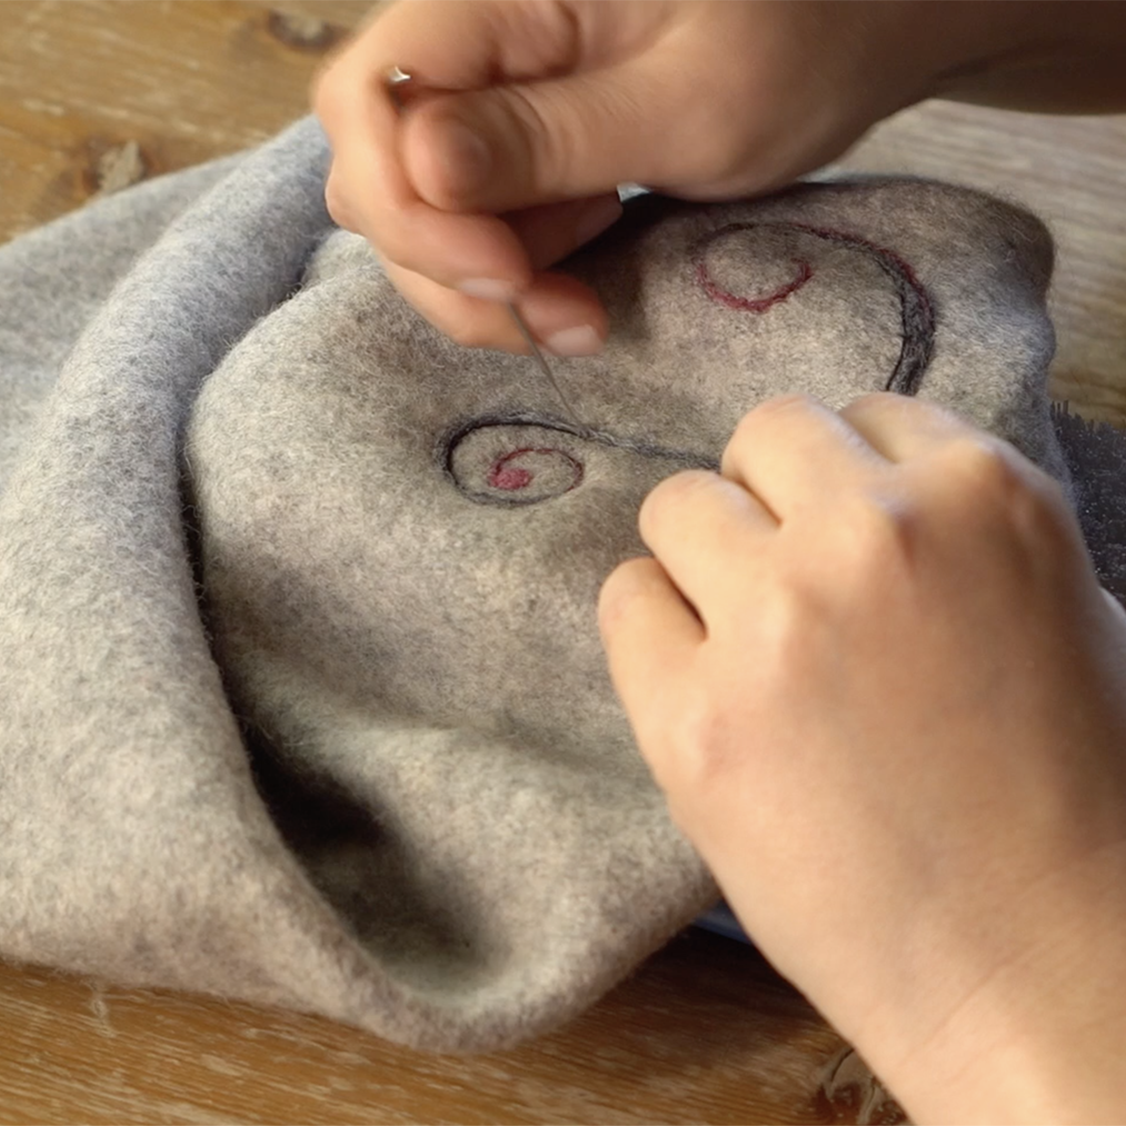 Video courses – felting for beginners, needle felting appliqués on fabric and material, tutorial – felted flowers and ornaments, step by step